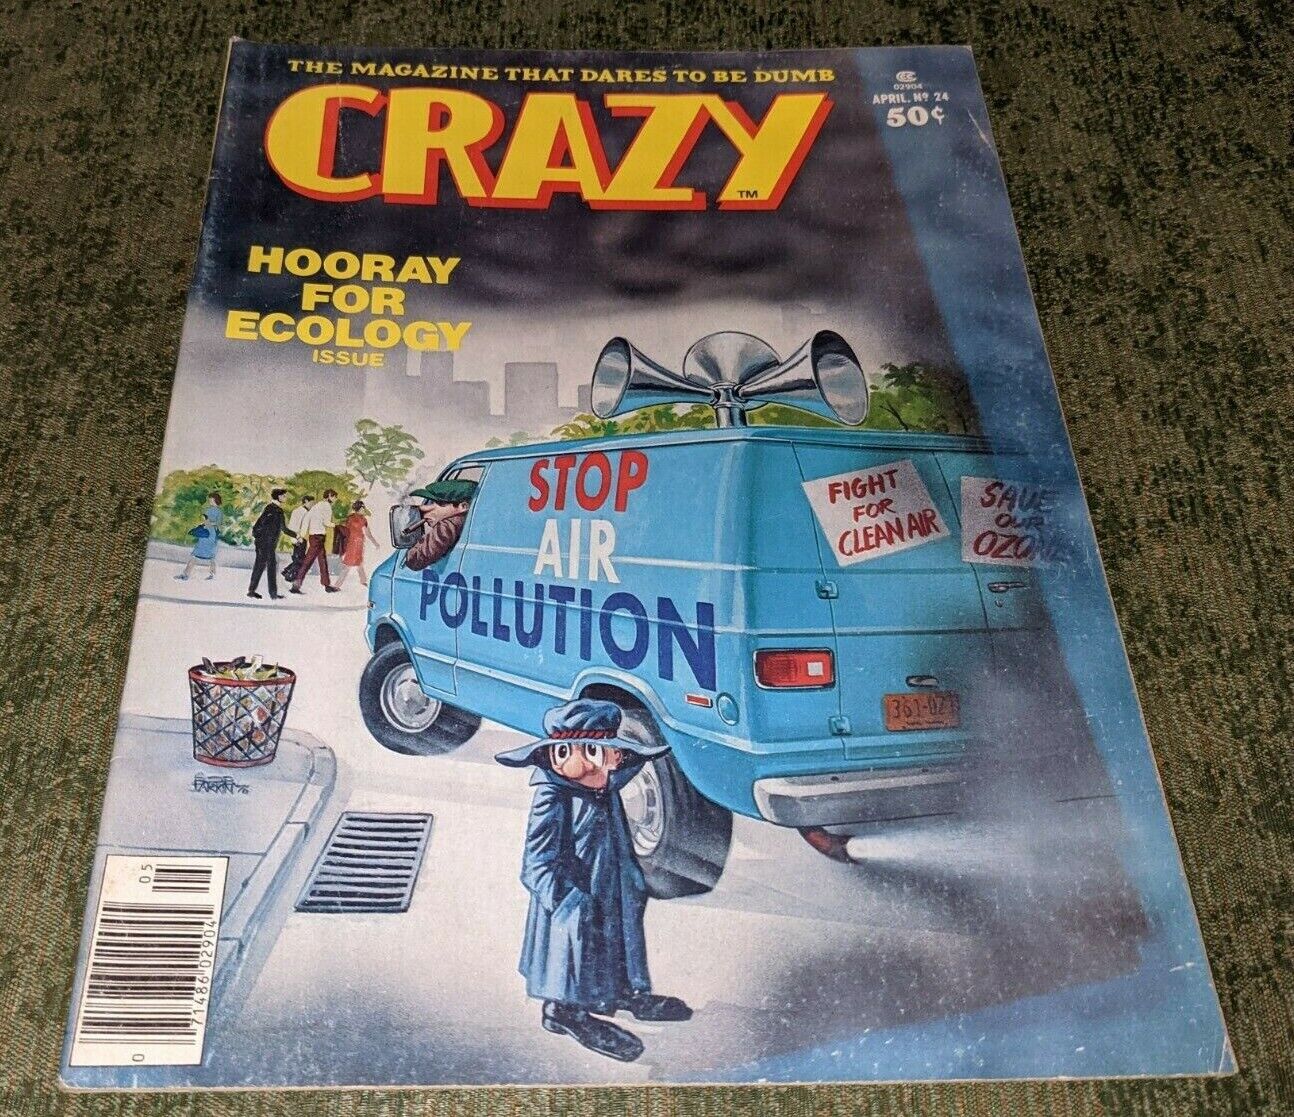 Vintage Crazy Magazine April No. 24 Hooray for Ecology Issue April 1977